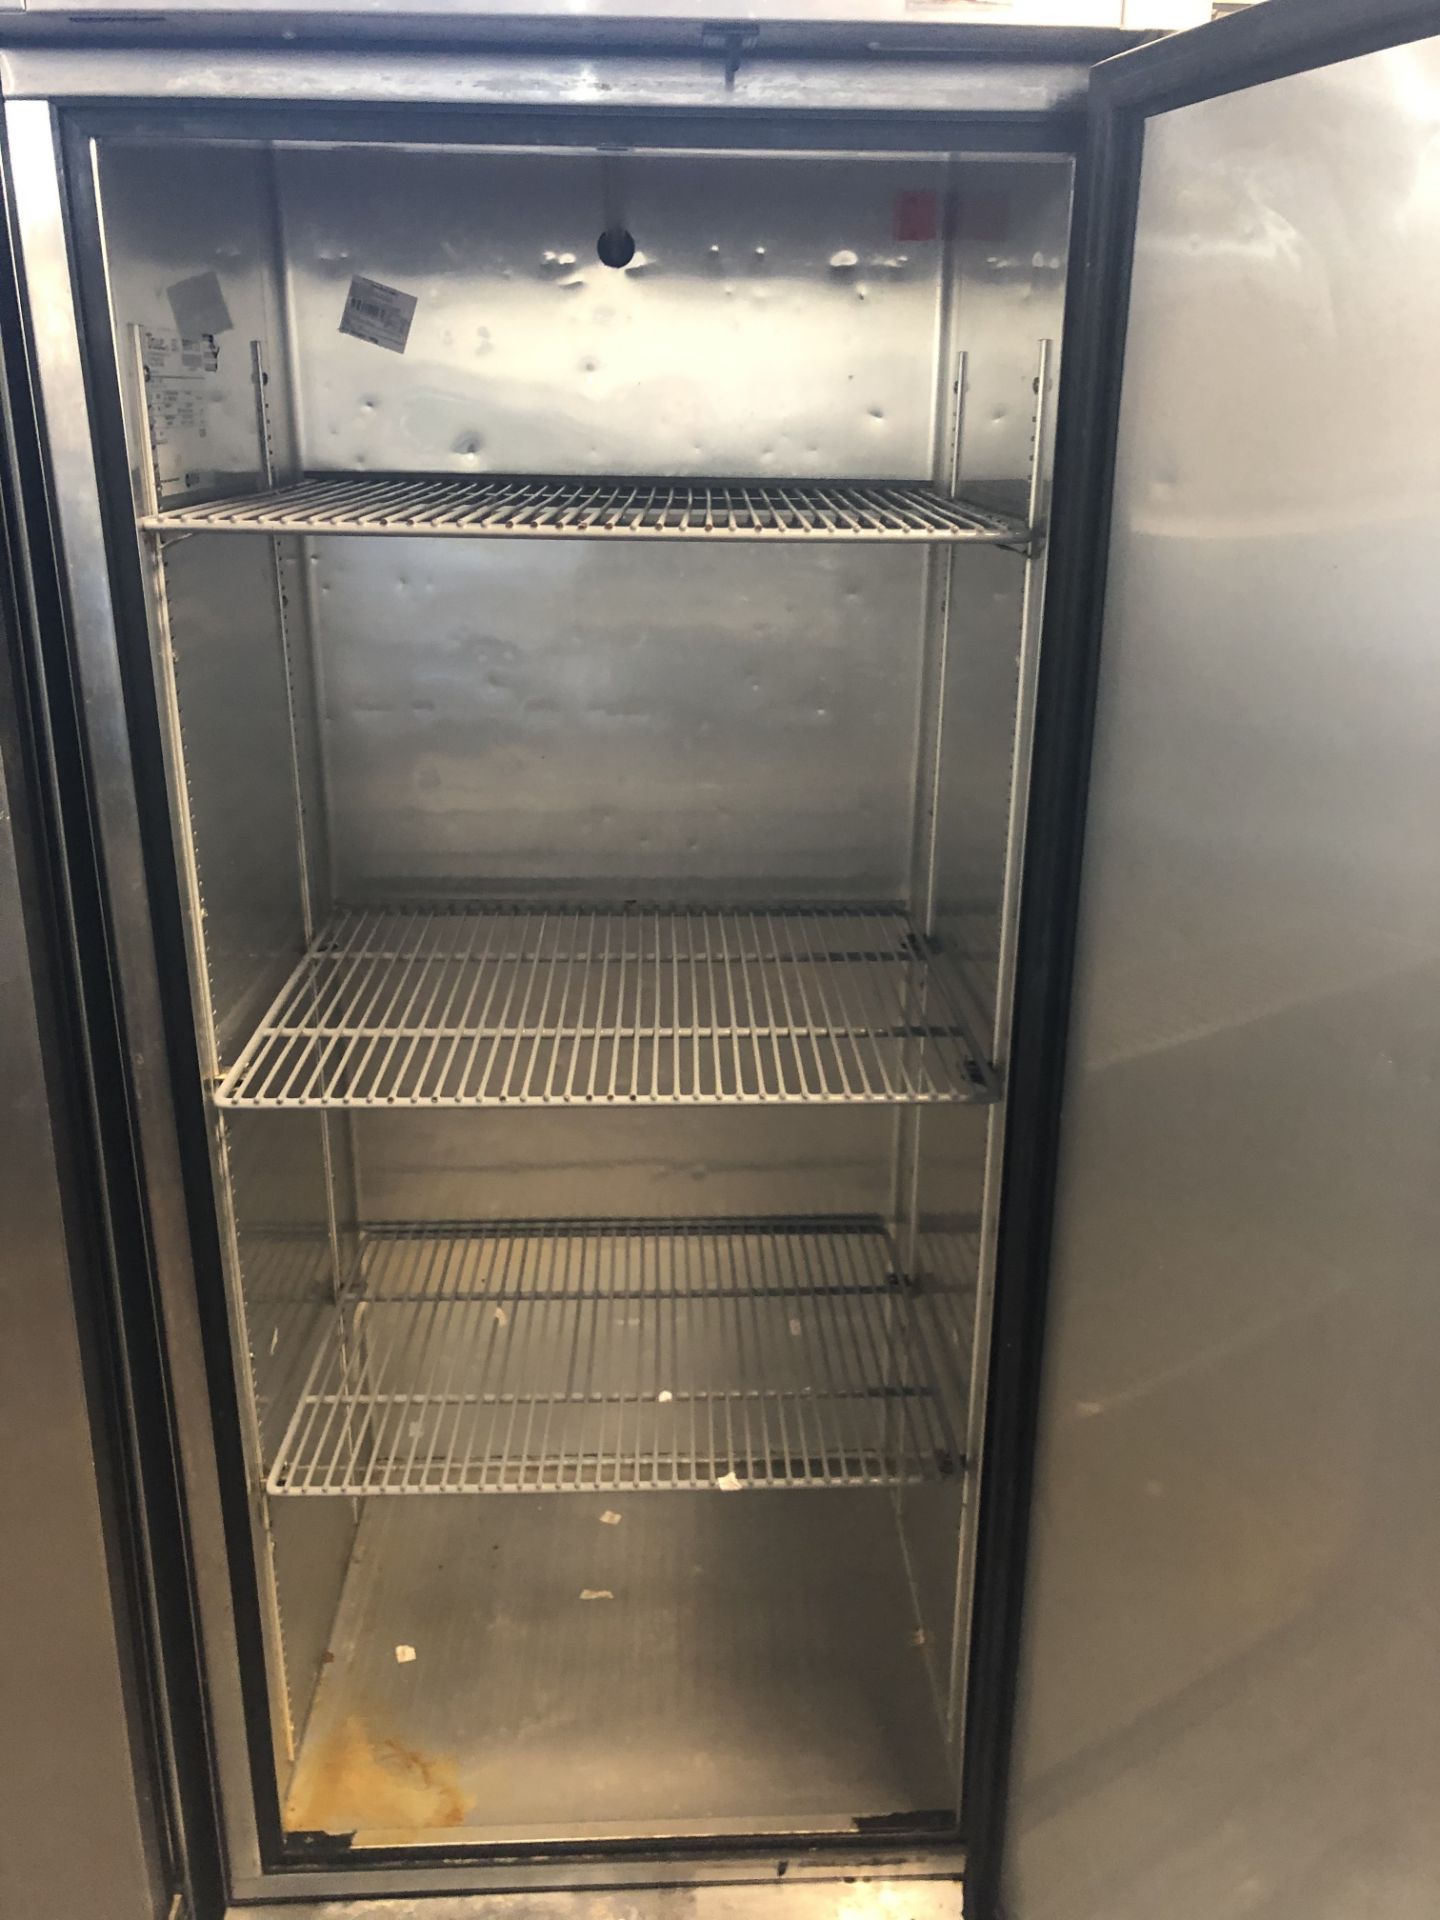 True Refrigeration T-19E-HC Upright Commercial Stainless Steel Fridge - Image 4 of 4